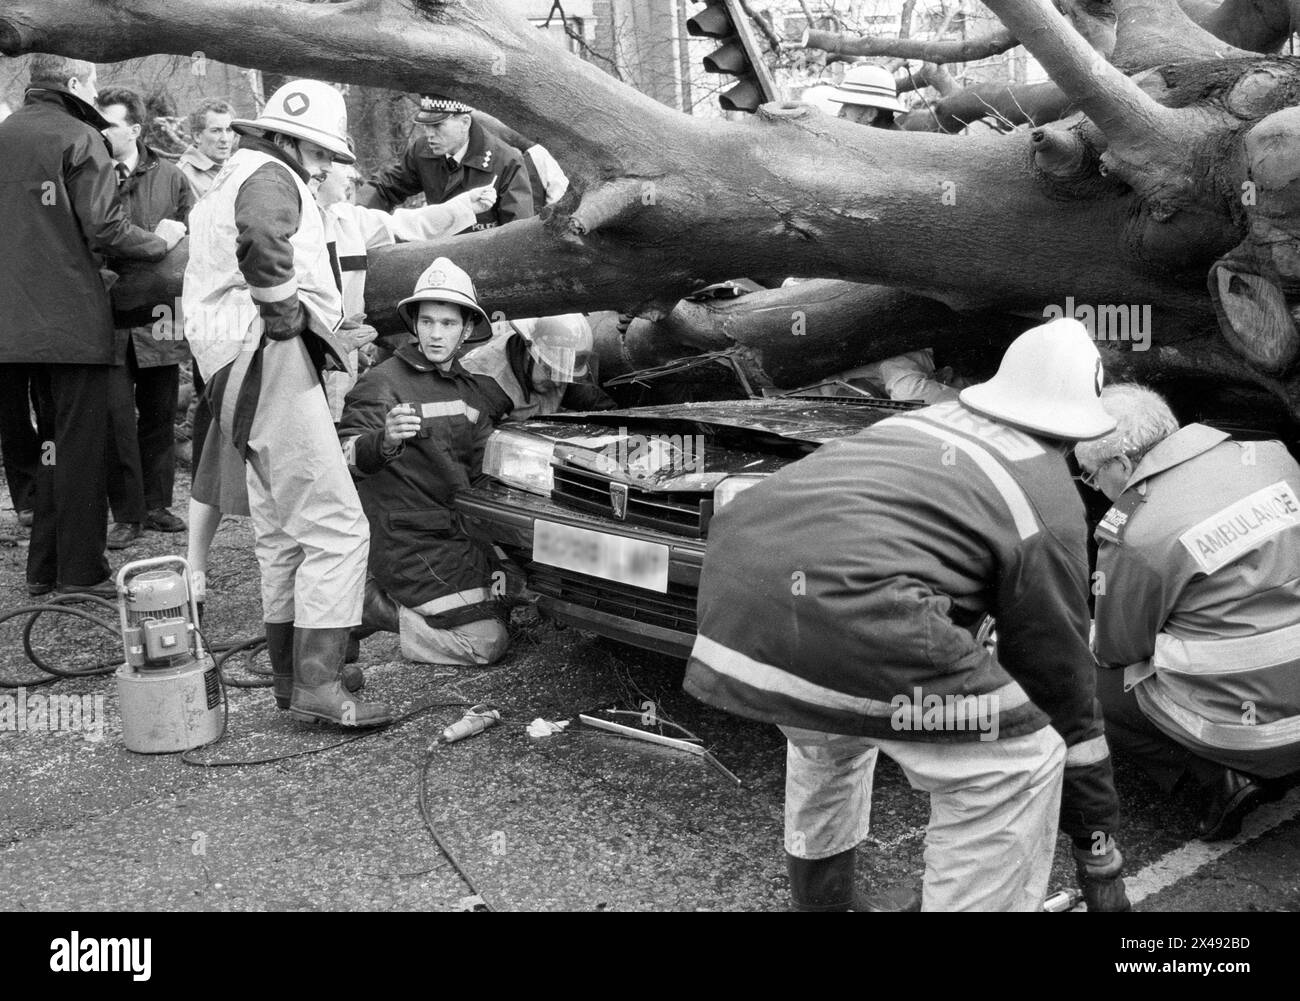 An archive newspaper image of Fire crews and Poilce rushing to save a driver in a car partially crushed under a fallen tree during the great storm in January 1990. Stock Photo